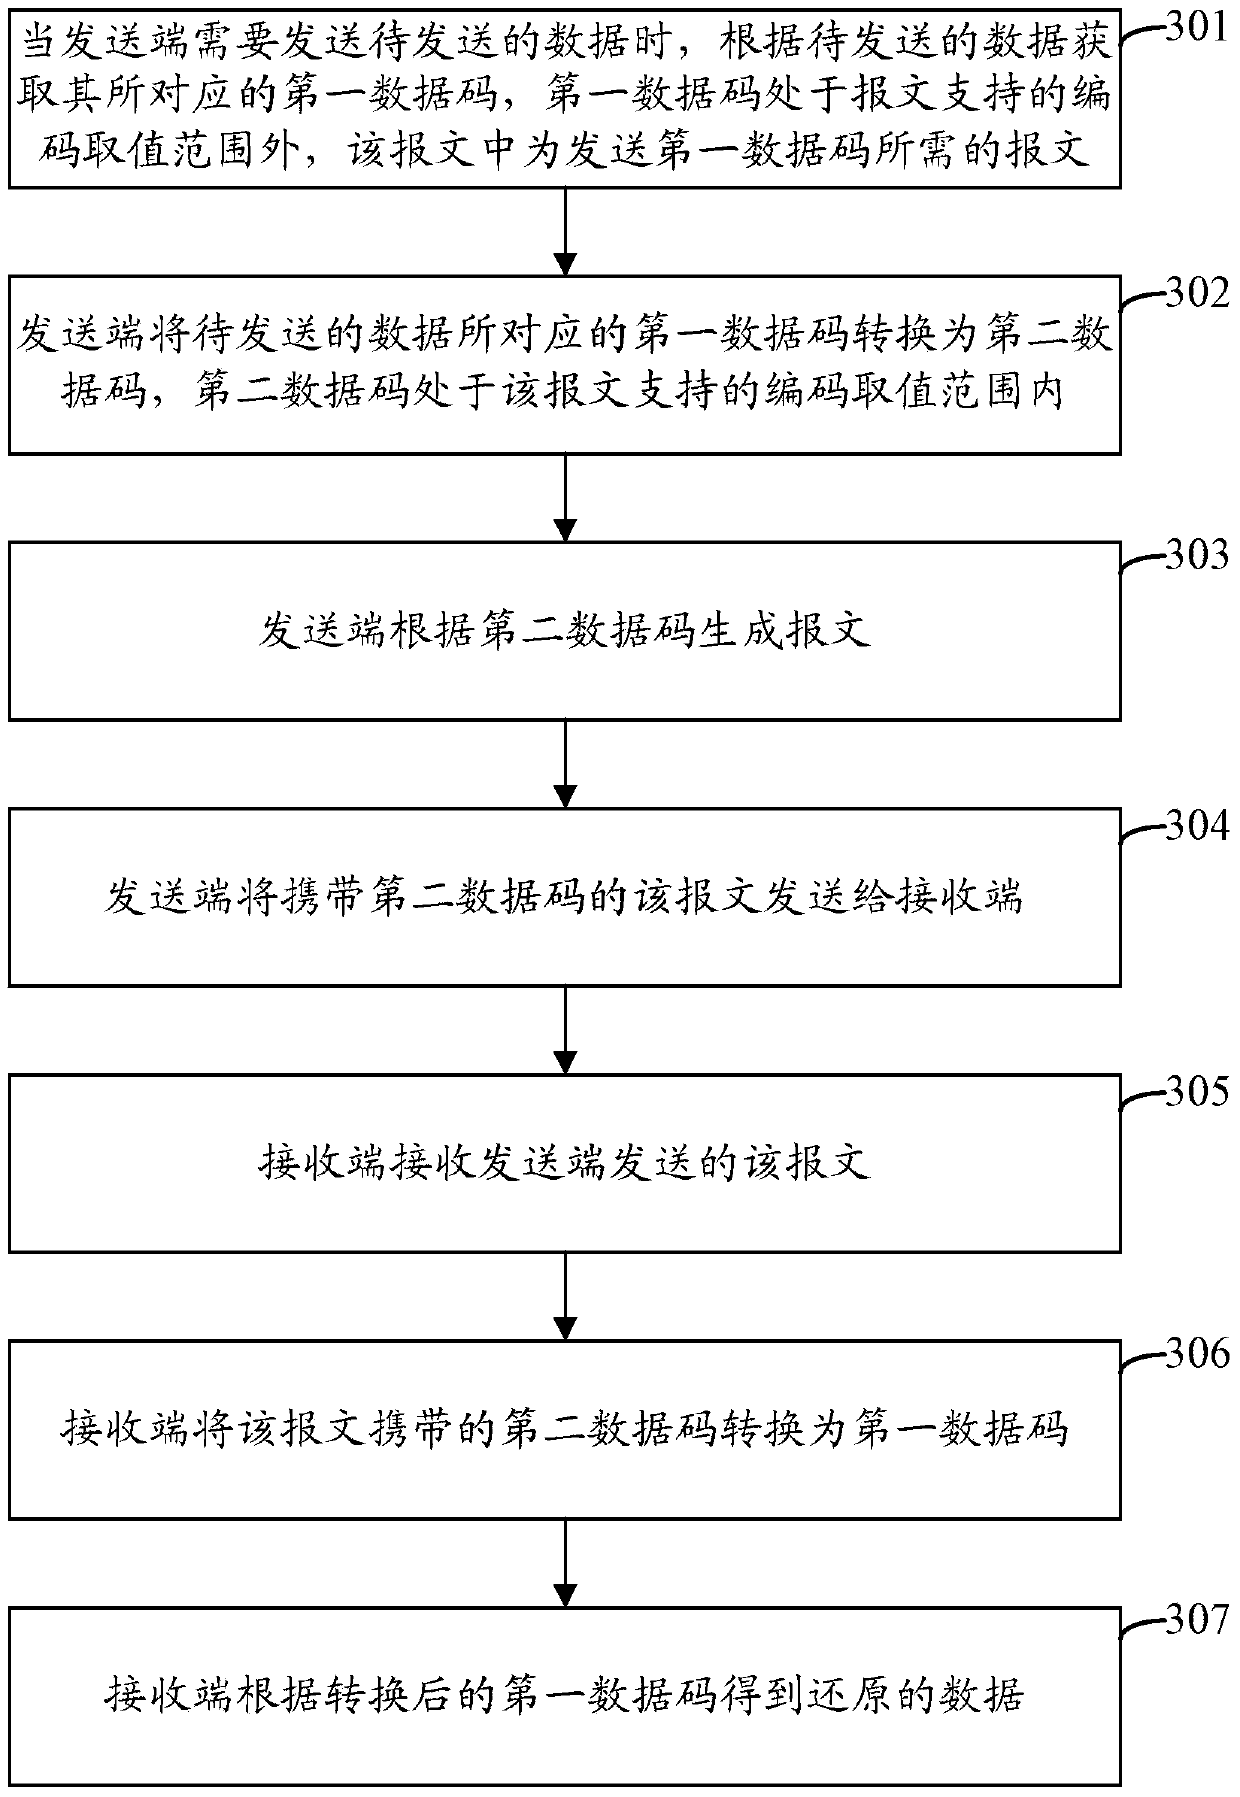 Method and device for transmitting data codes in messages